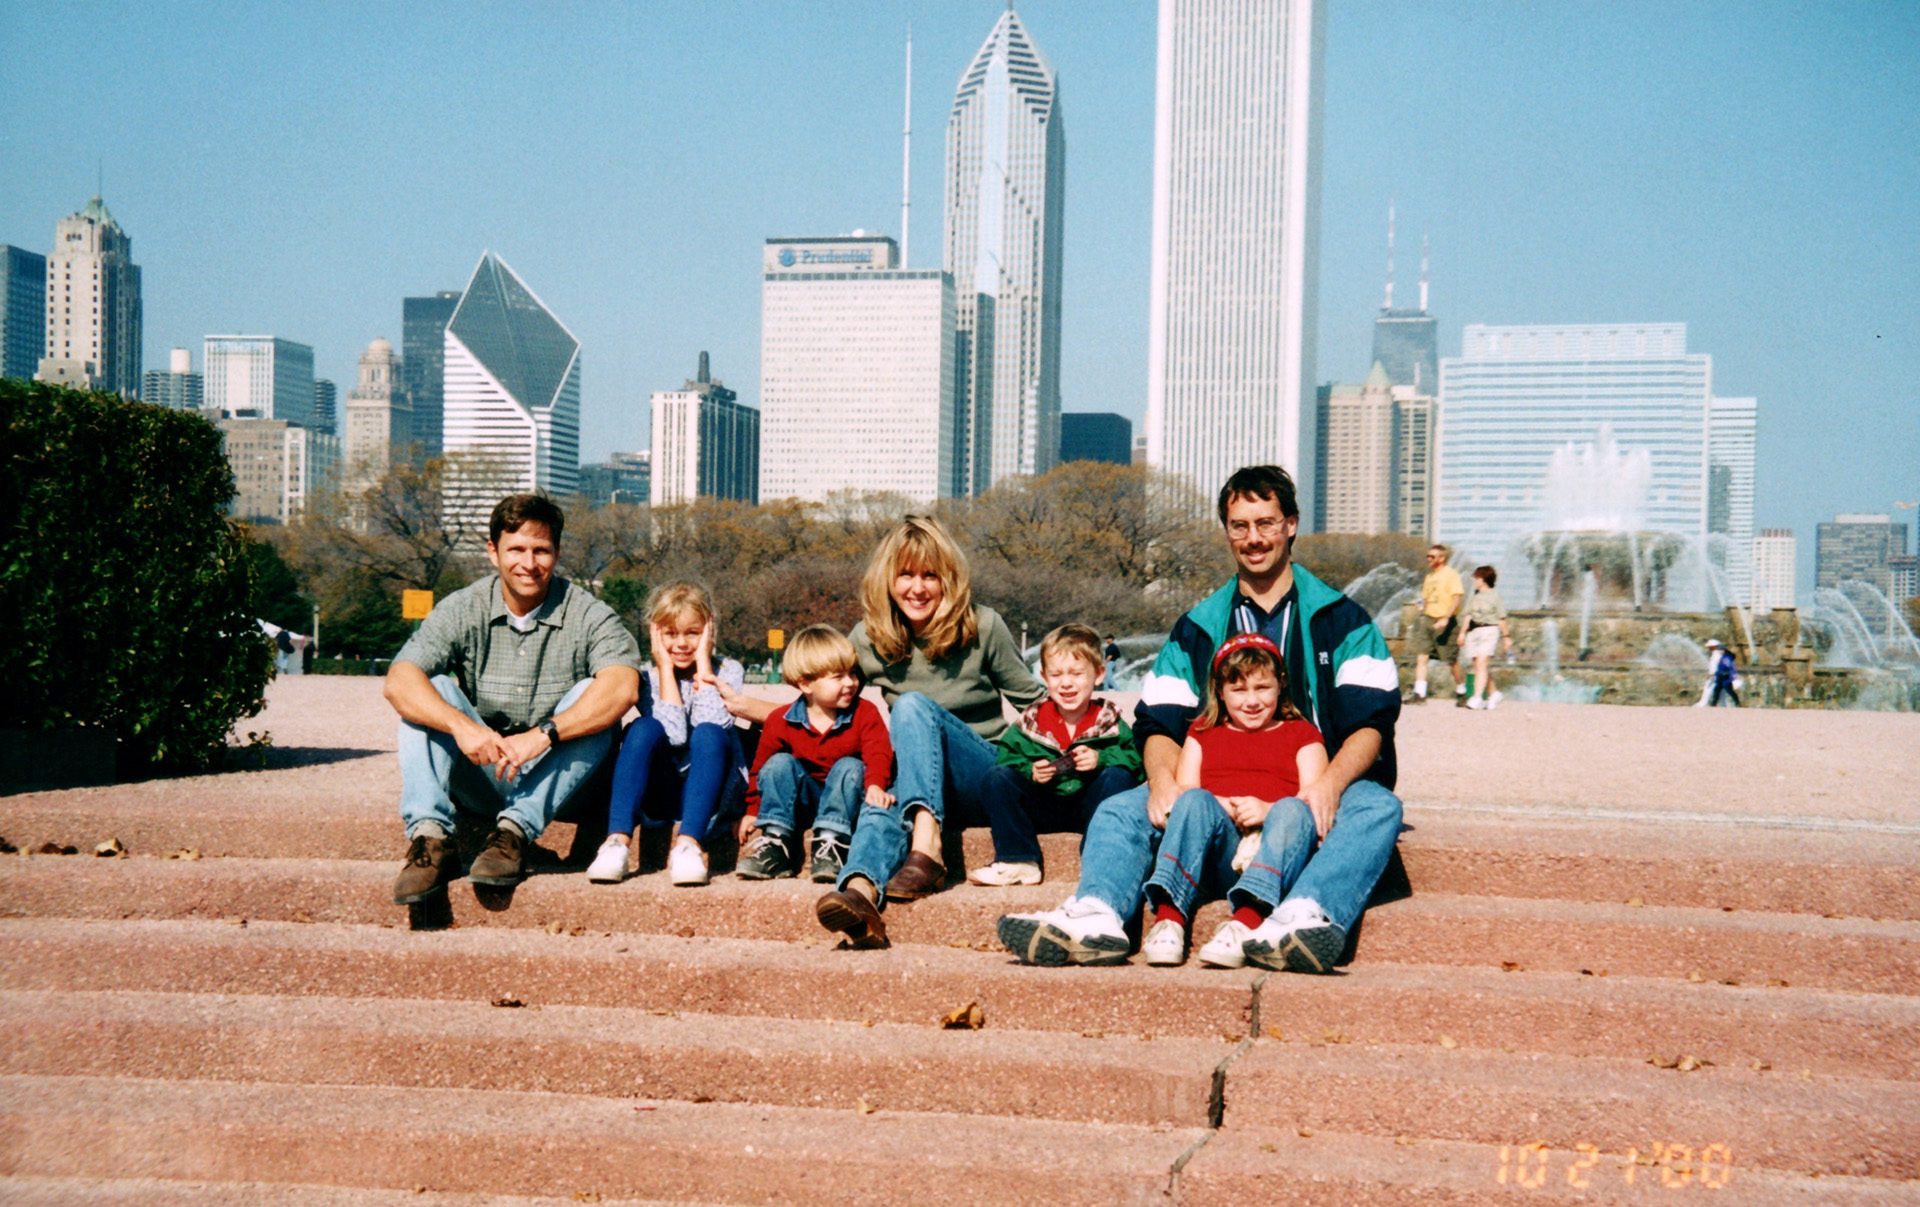 Trip to Chicago and the Buckingham Fountain as kids